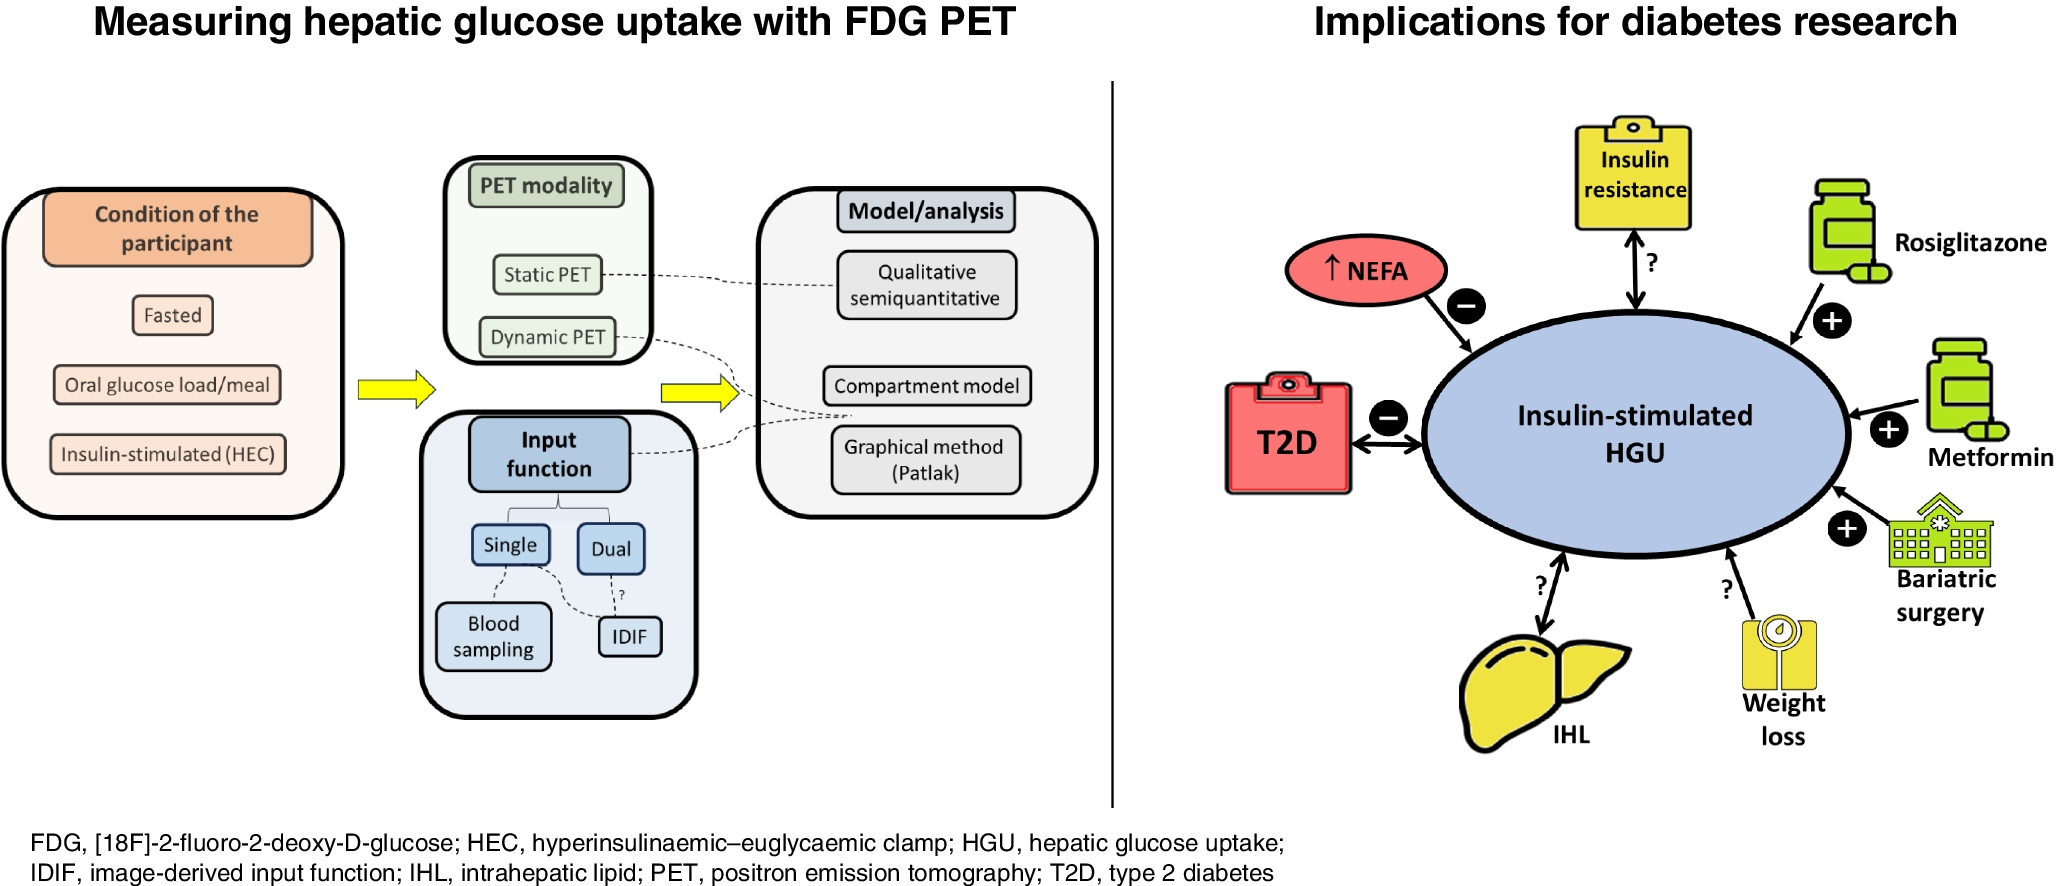 Advances and challenges in measuring hepatic glucose uptake with FDG PET: implications for diabetes research